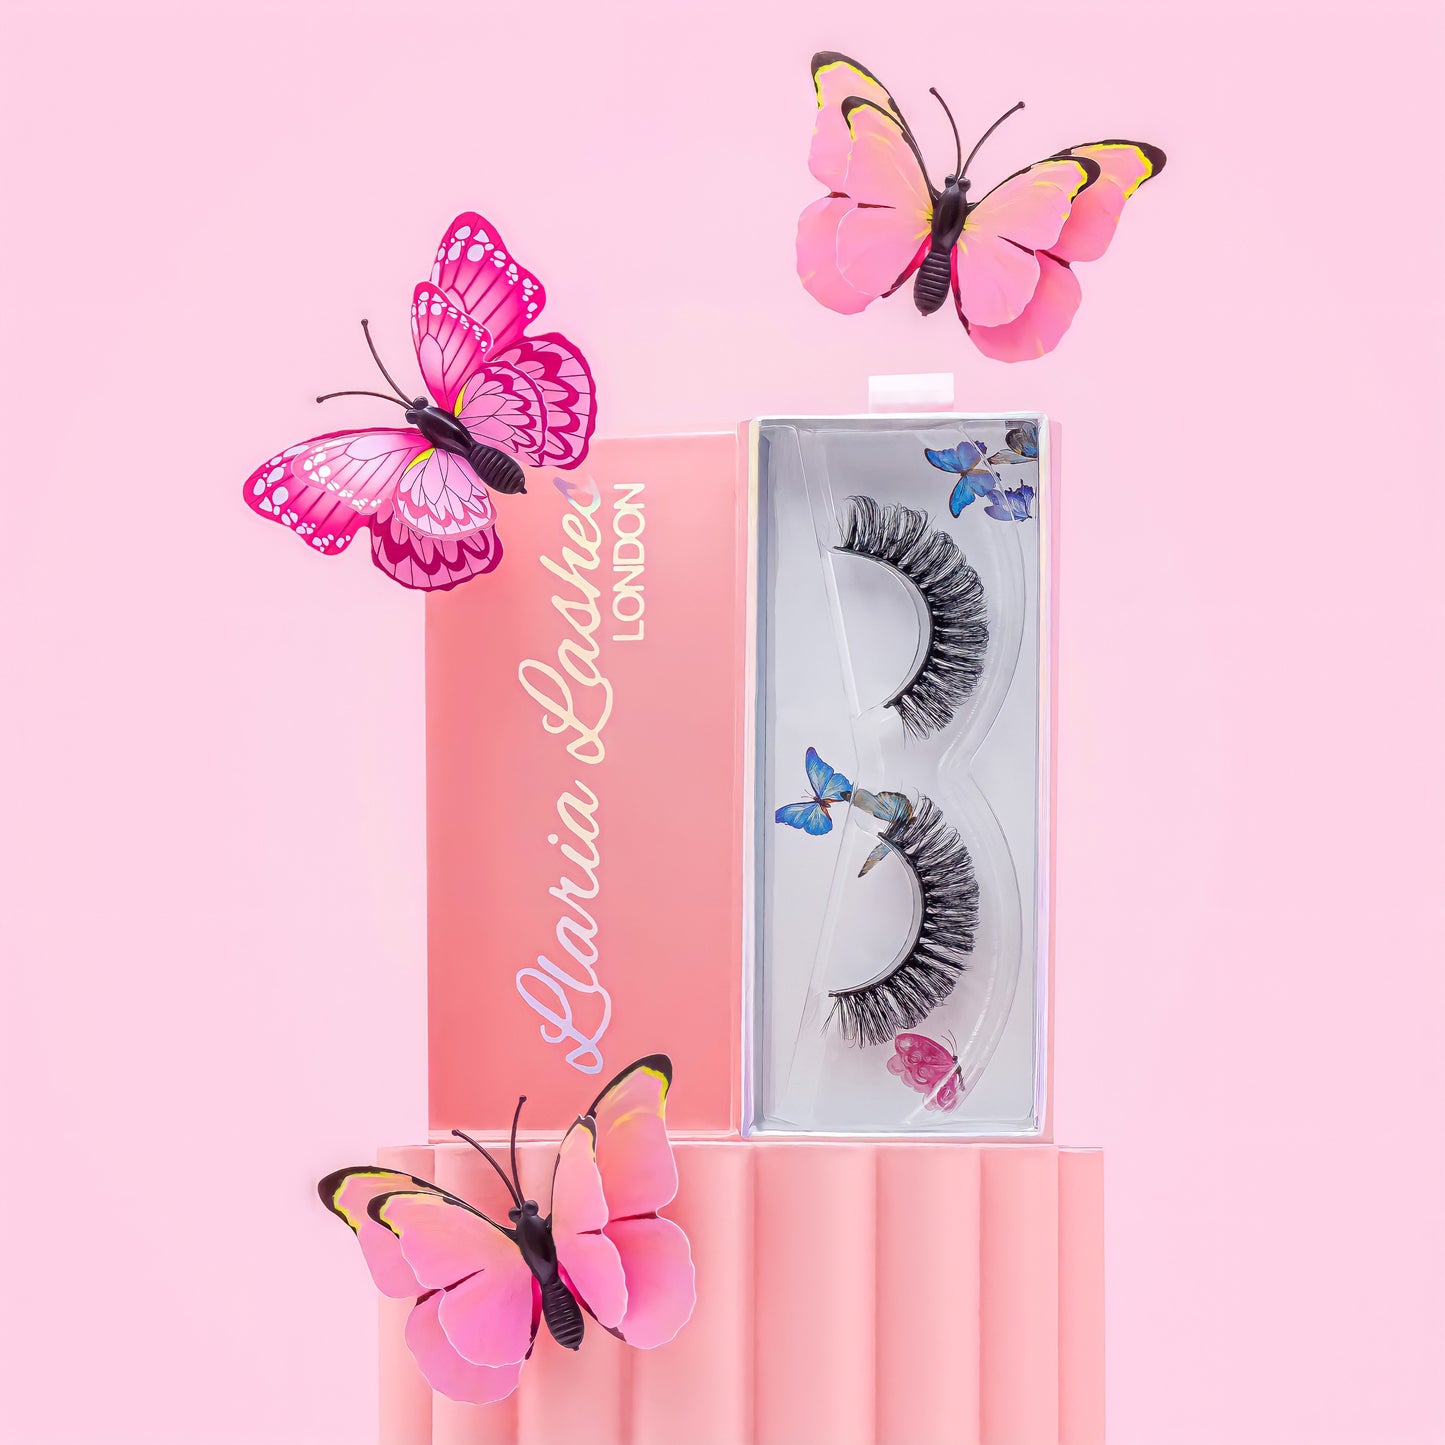 Long and wispy d curl faux mink russian style false eyelashes.